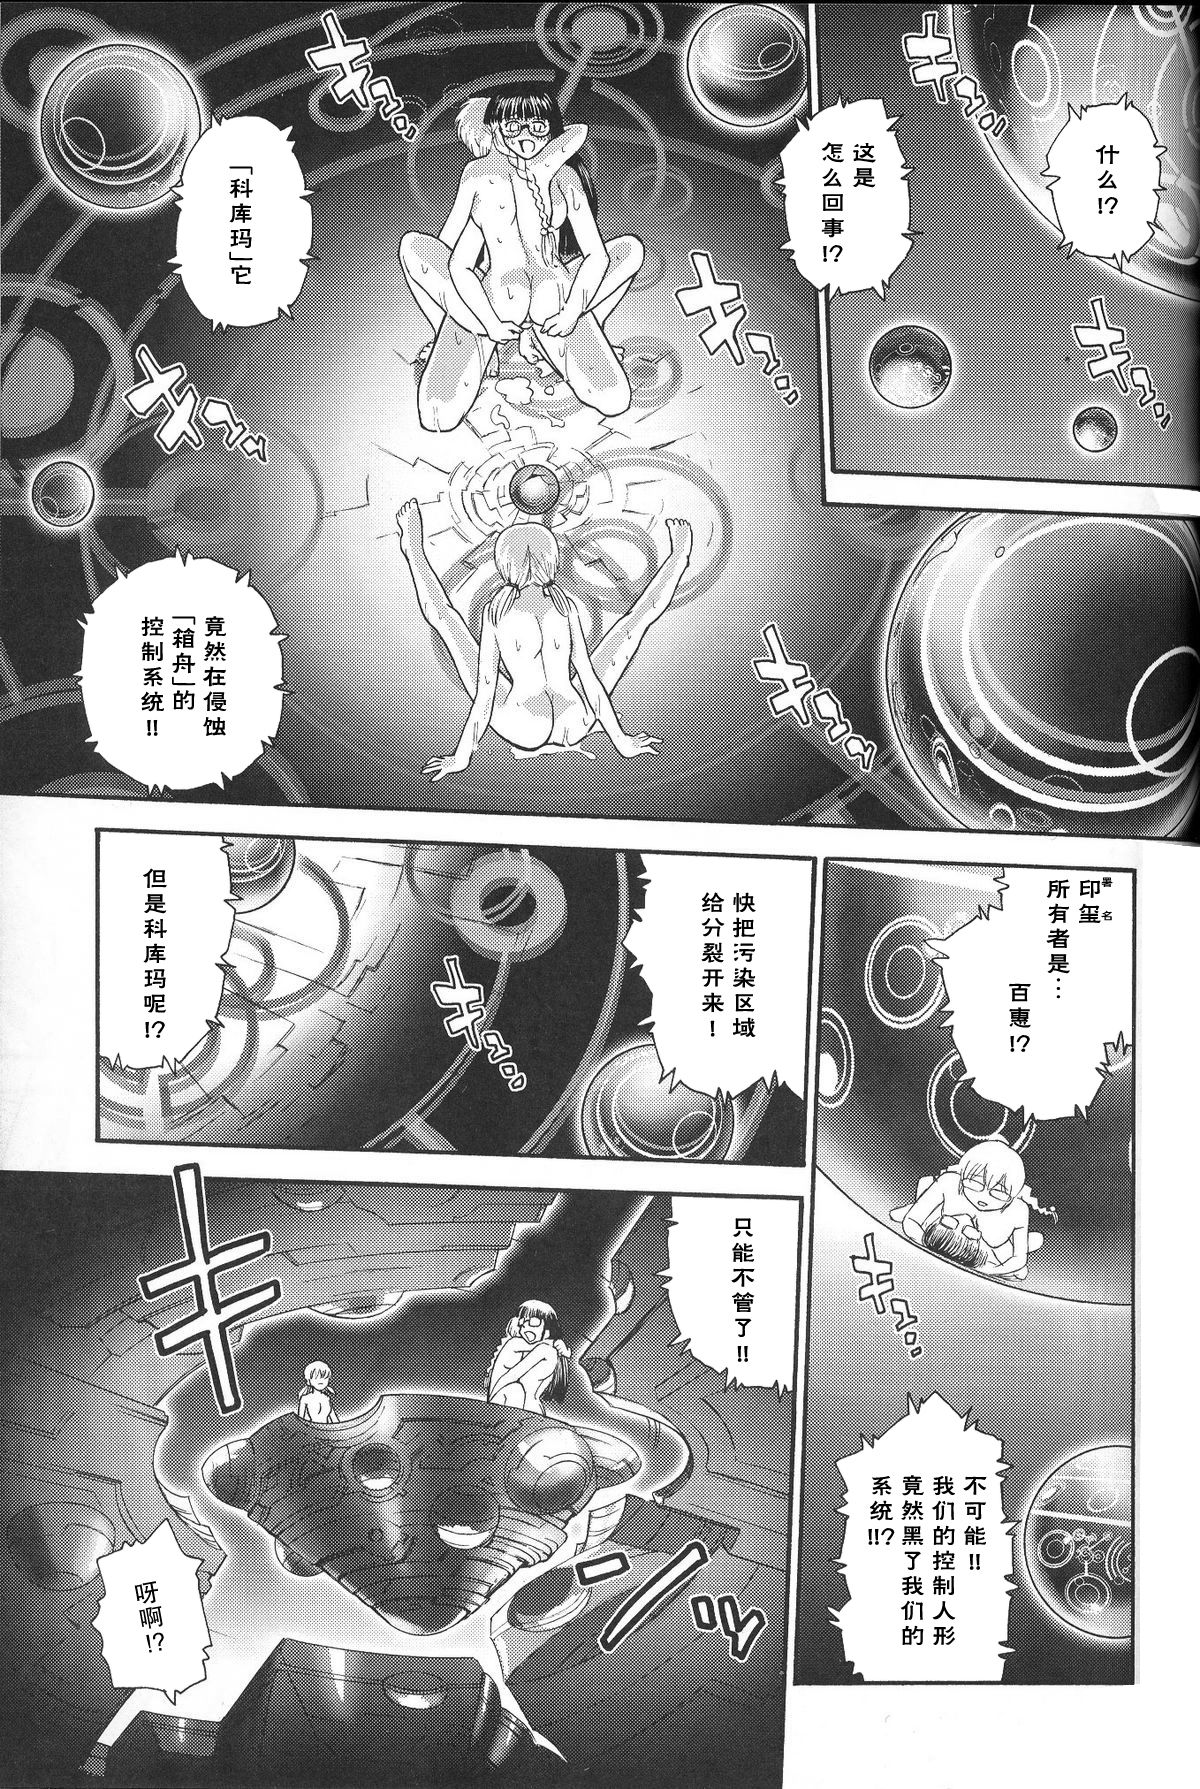 (C71) [Behind Moon (Q)] Dulce Report 8 | 达西报告 8 [Chinese] [哈尼喵汉化组] [Decensored] page 14 full